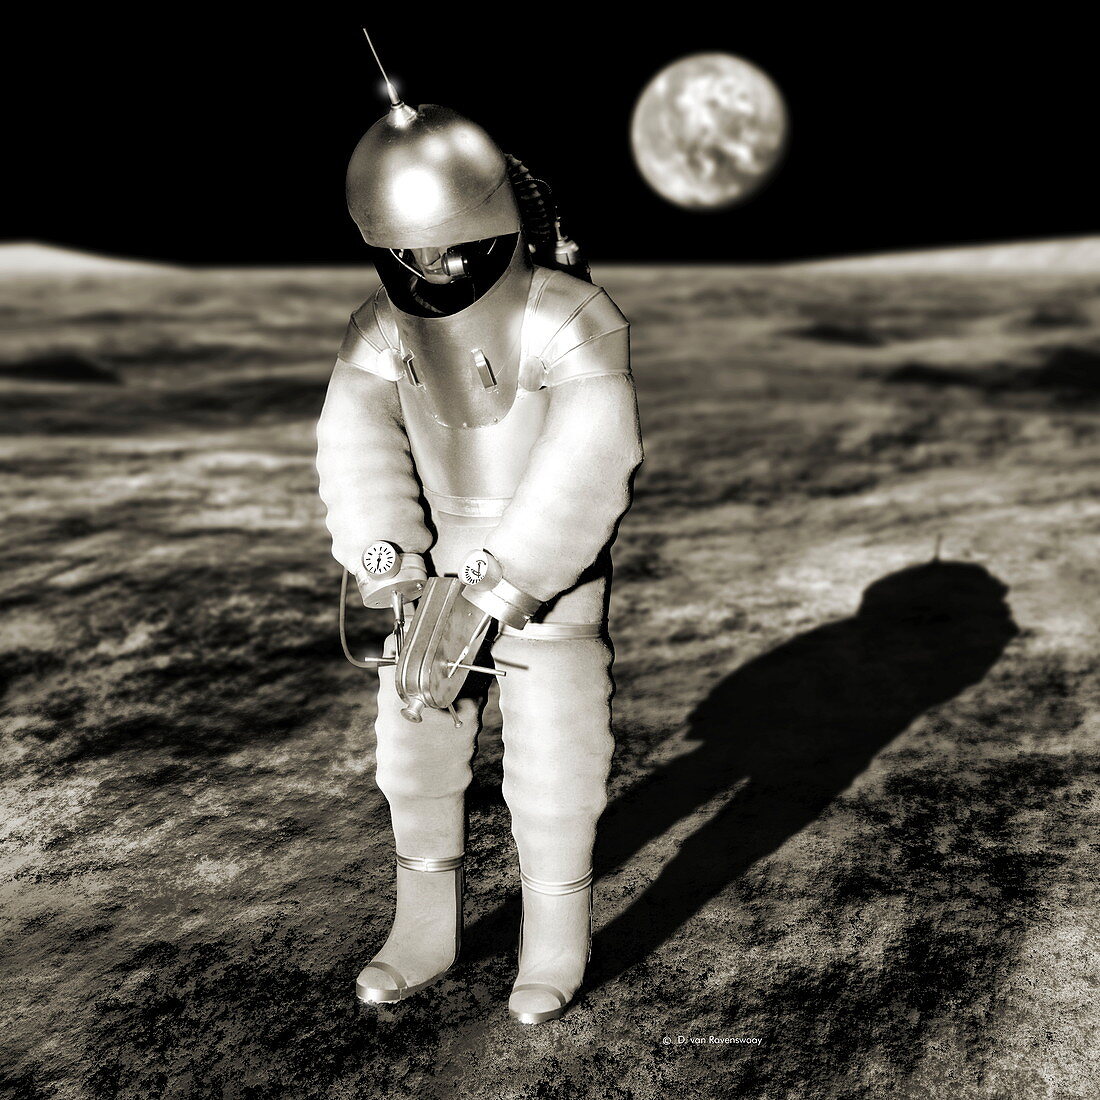 Early space suit design,conceptual image